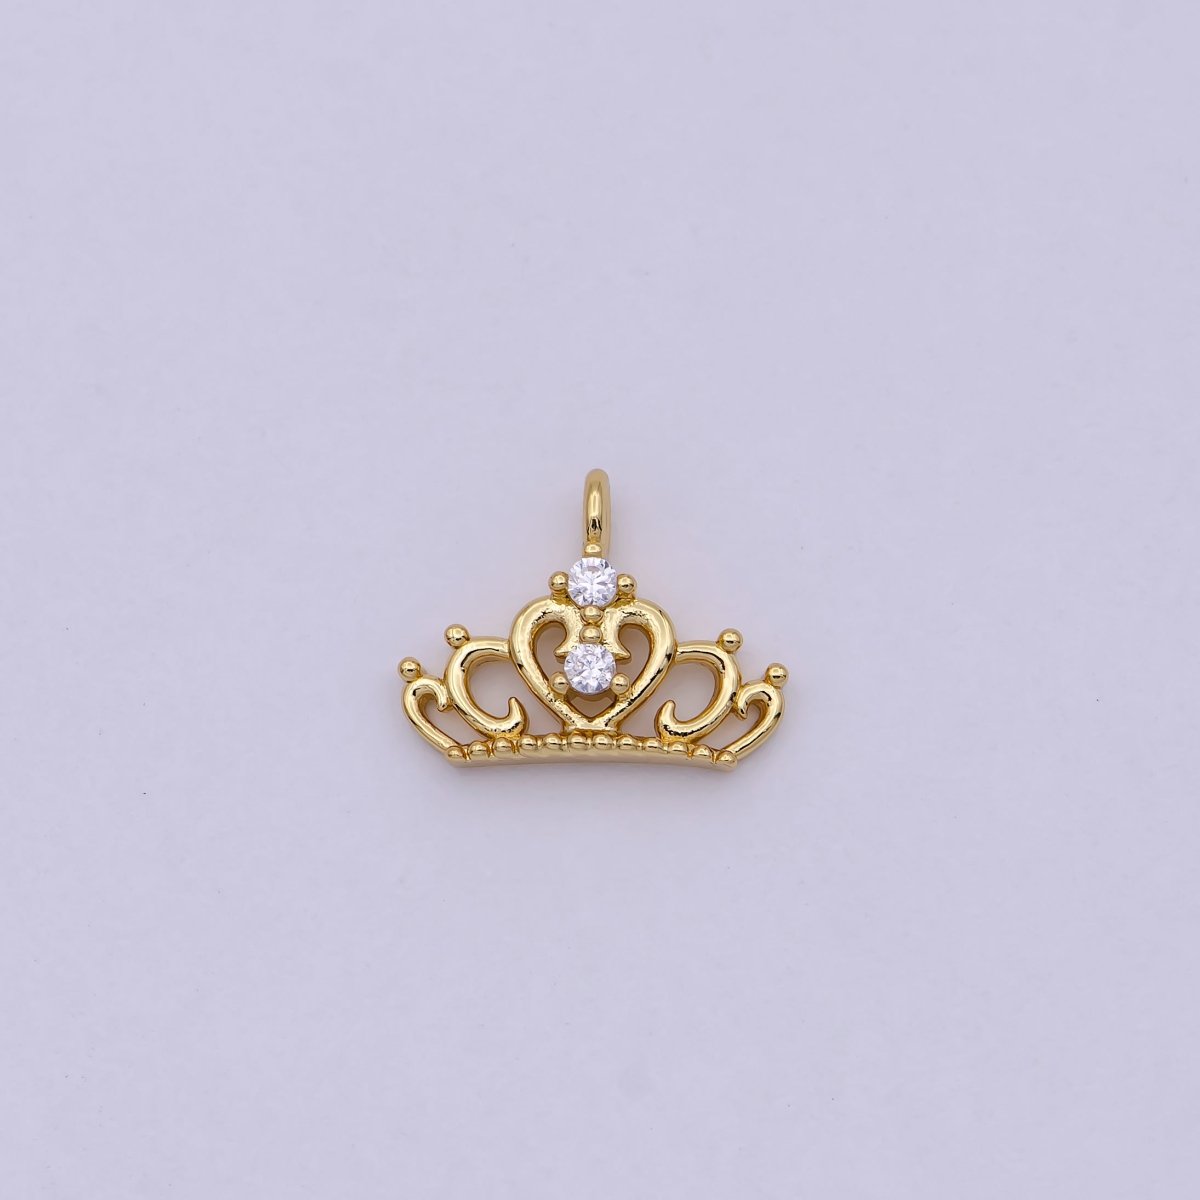 Mini Silver Princess Tiara Charm - Gold Princess Crown Charm for Necklace or Bracelet Component N-449 N-450 - DLUXCA